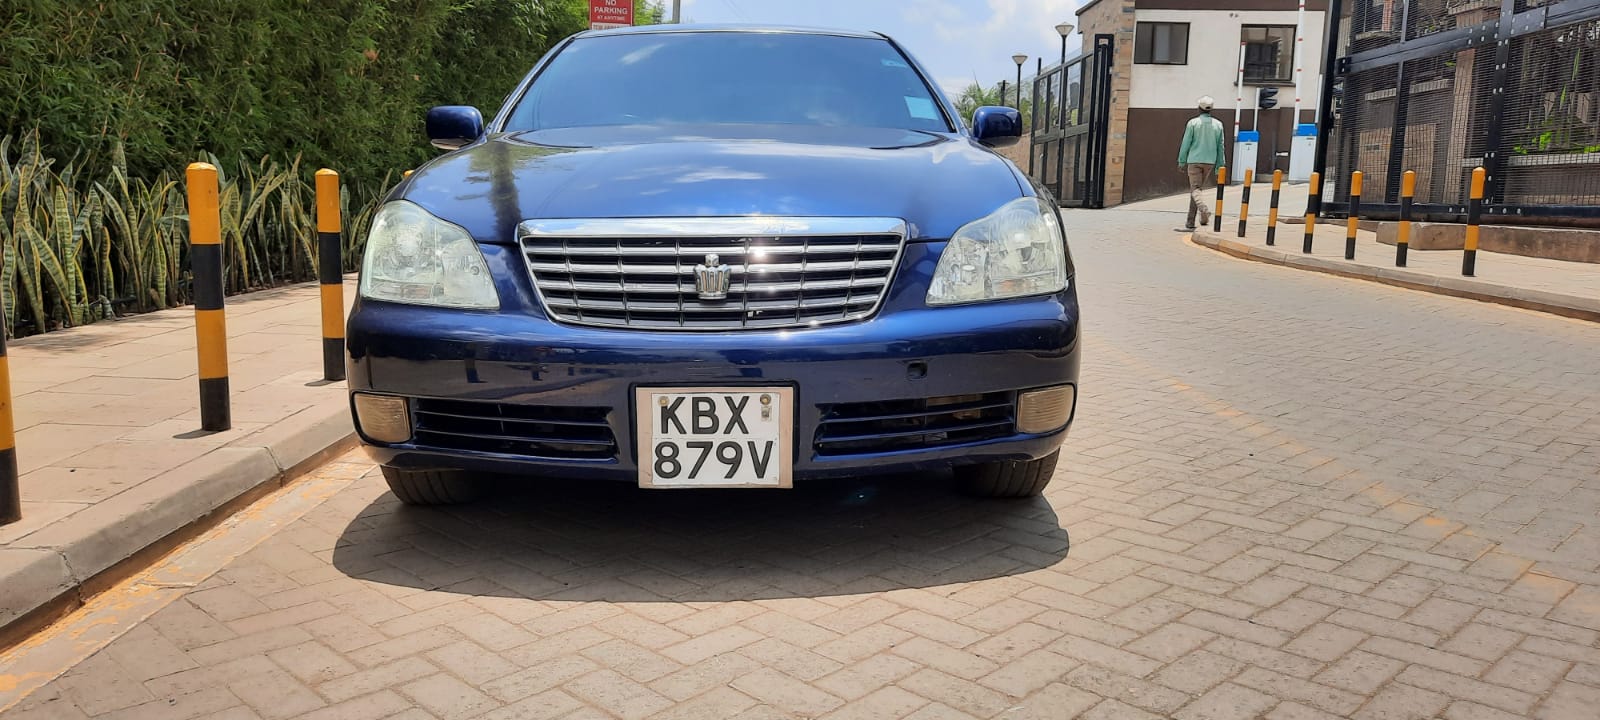 Toyota Crown 2006 pay 20% Balance in 60 Months OFFER